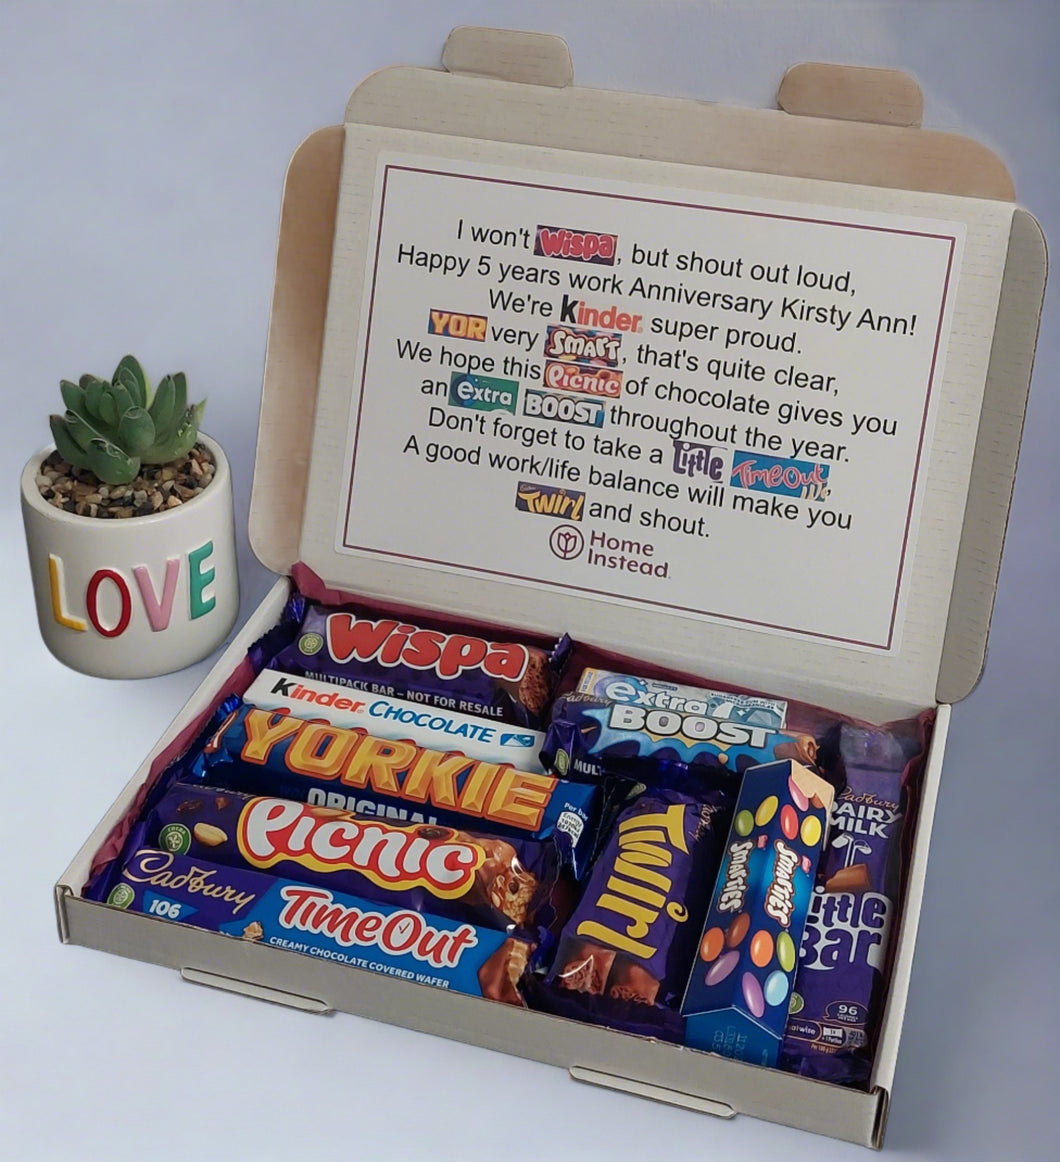 Work Anniversary Chocolate Poem Letterbox Gift - The Happiness Box